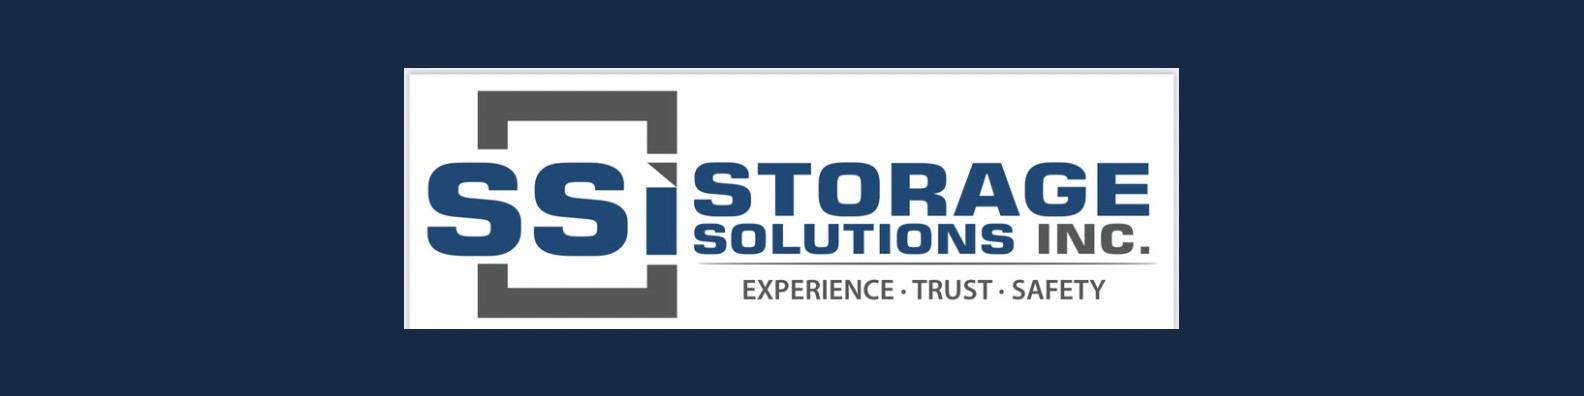 Storage Solutions Inc Linkedin, Storage Solutions Inc Knoxville Tn